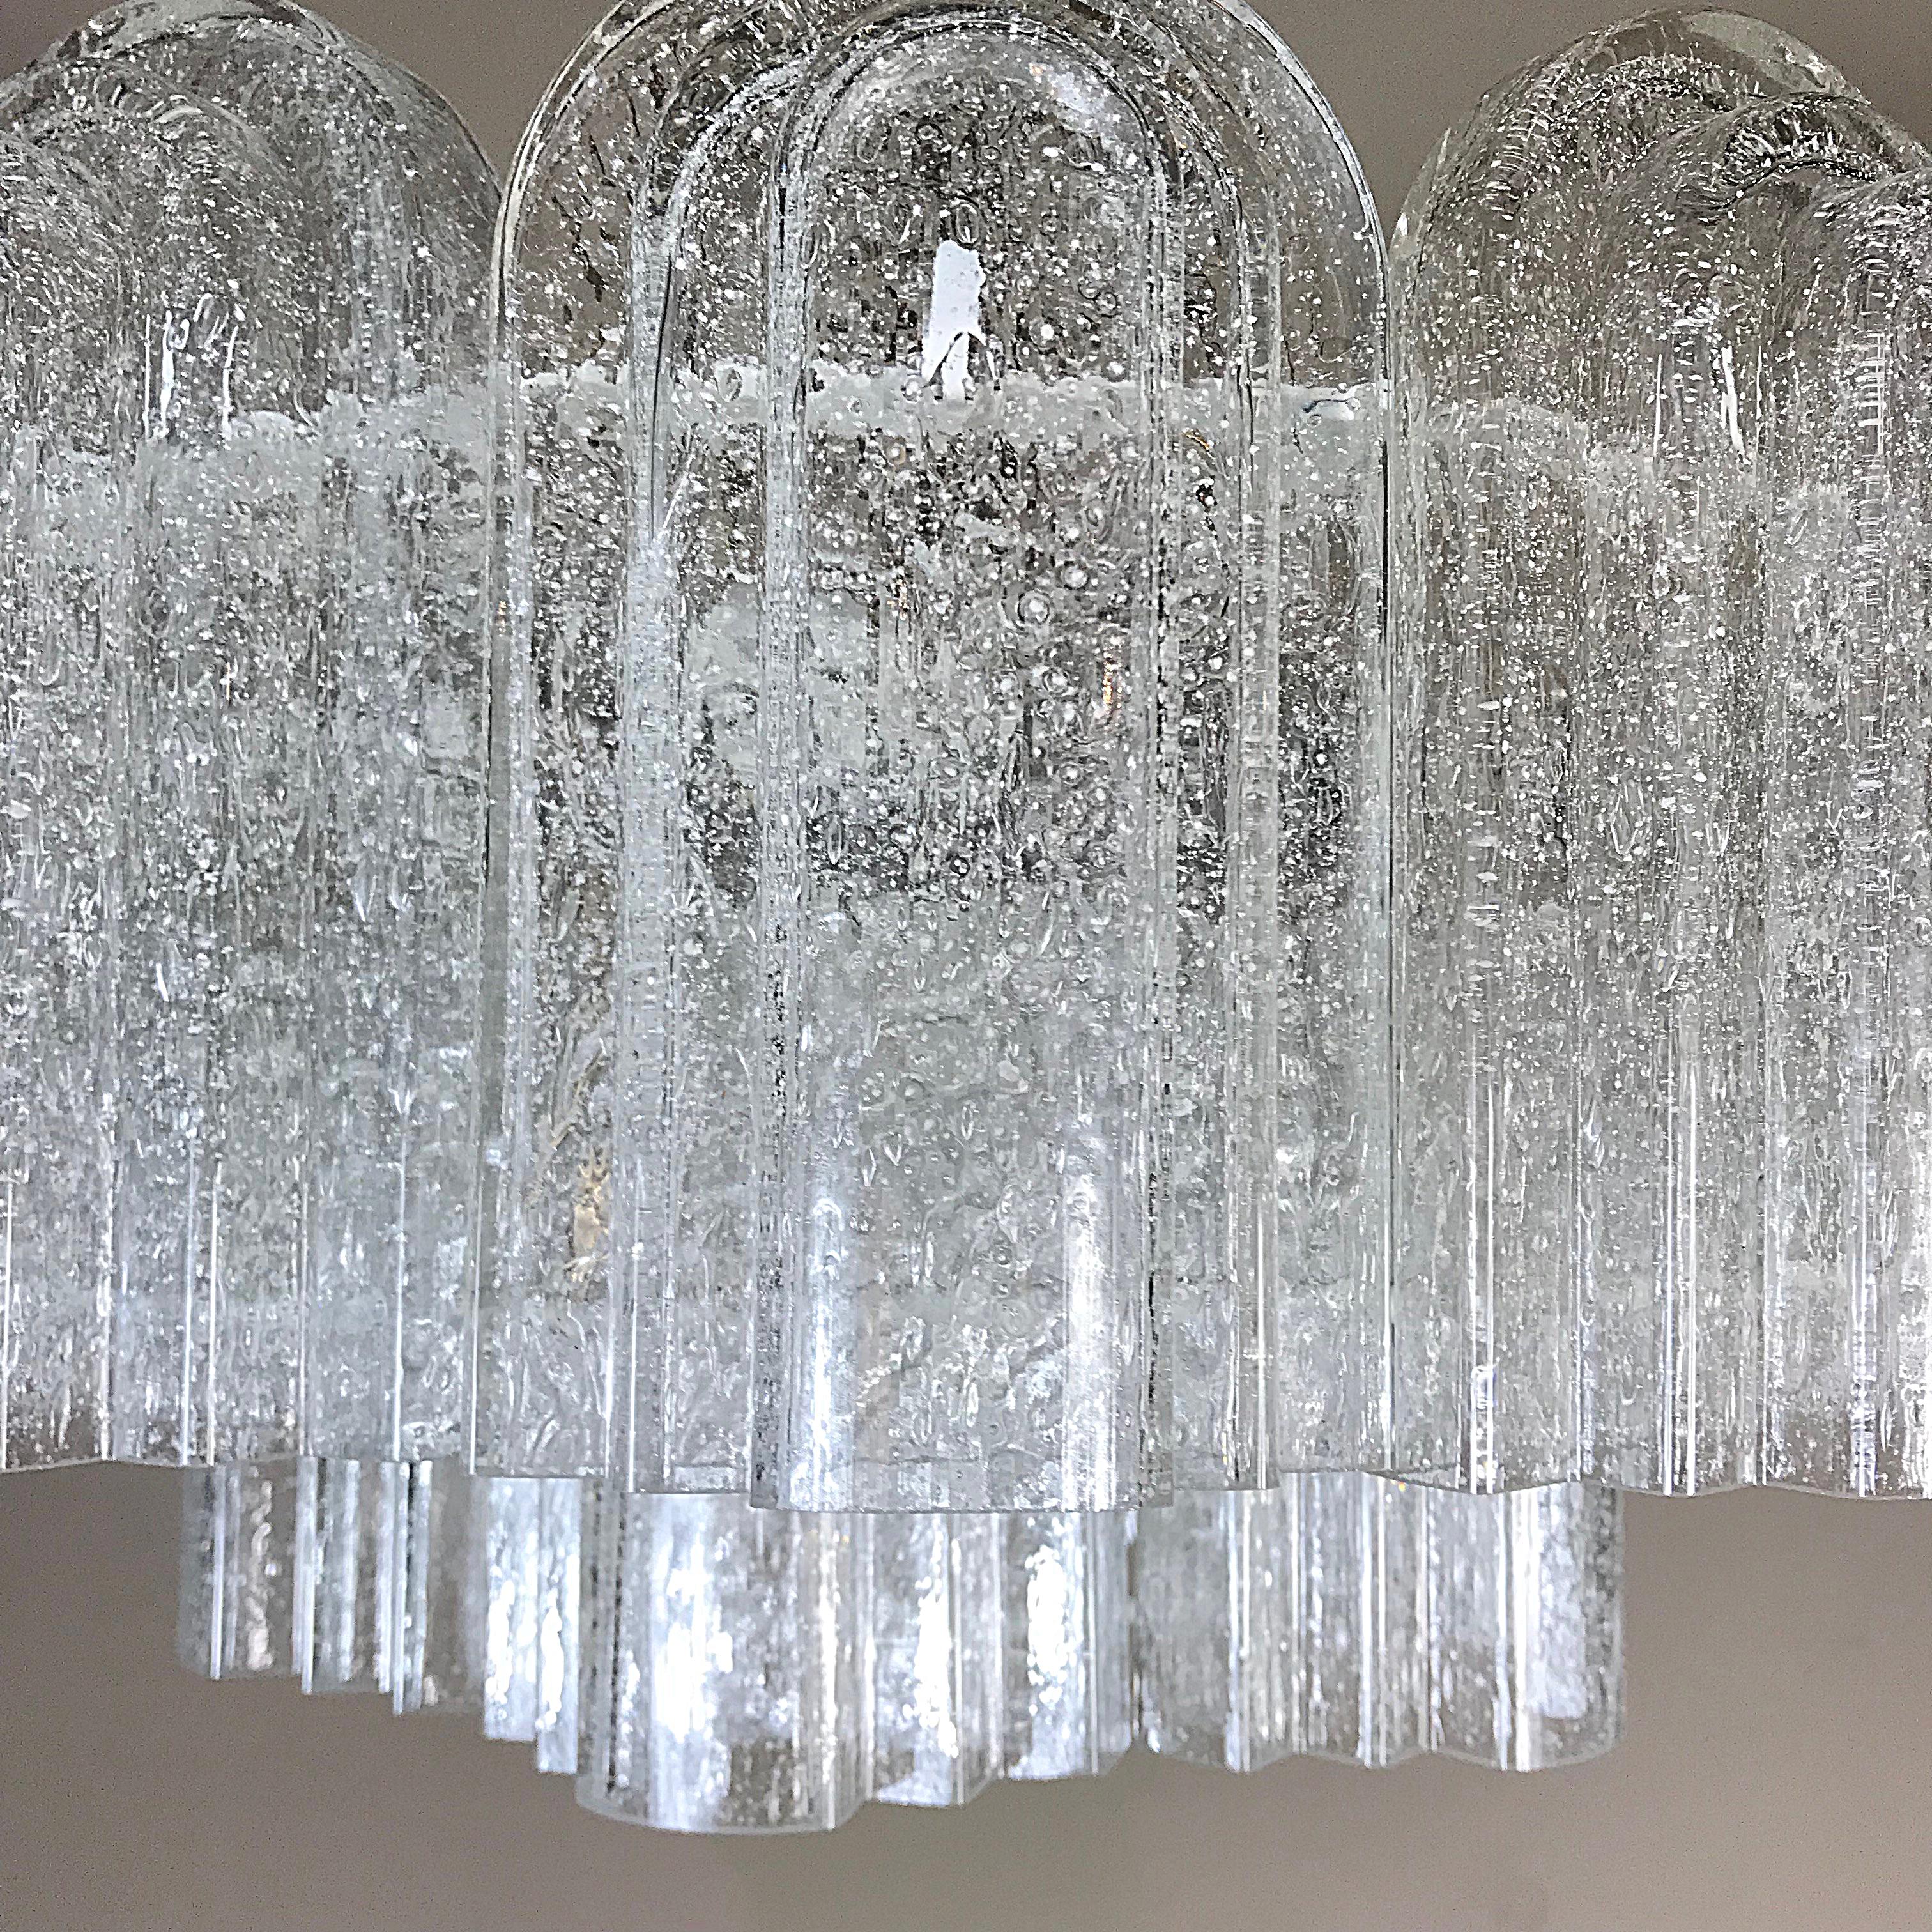 Beautiful midcentury chandelier manufactured by Doria in 1960s, Germany. It's featuring stepped blown glass hangers and elements with polished brass hardware. Fully working and tested condition with one Edison E27 and six E14 sockets, the lamp works